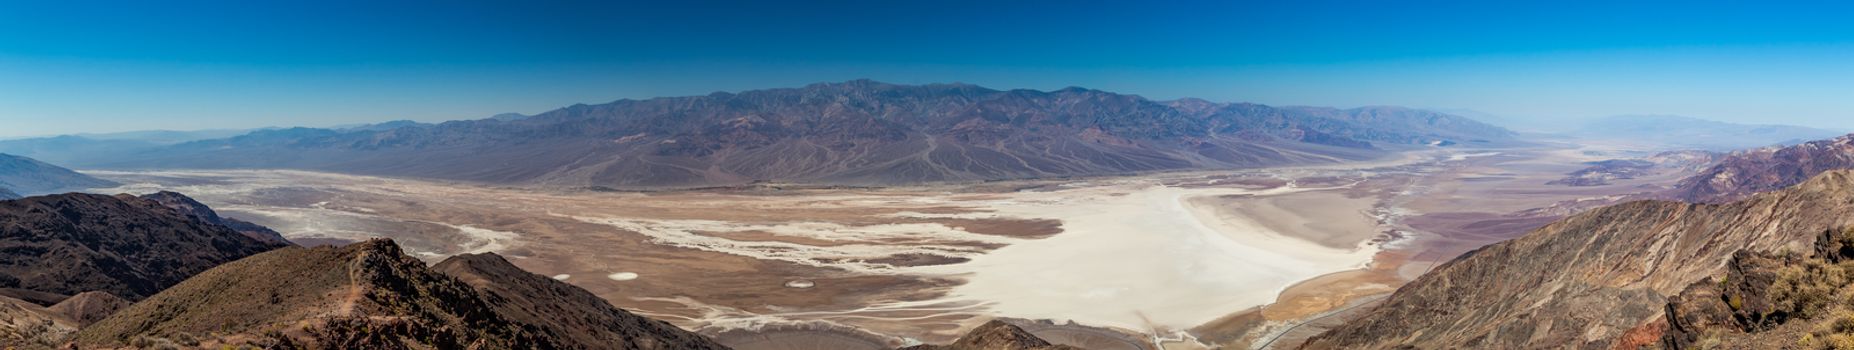 Dante's View is a viewpoint terrace at 1,669 m (5,476 ft) height, on the north side of Coffin Peak, along the crest of the Black Mountains, overlooking Death Valley. Dante's View is about 25 km (16 mi) south of Furnace Creek in Death Valley National Park.